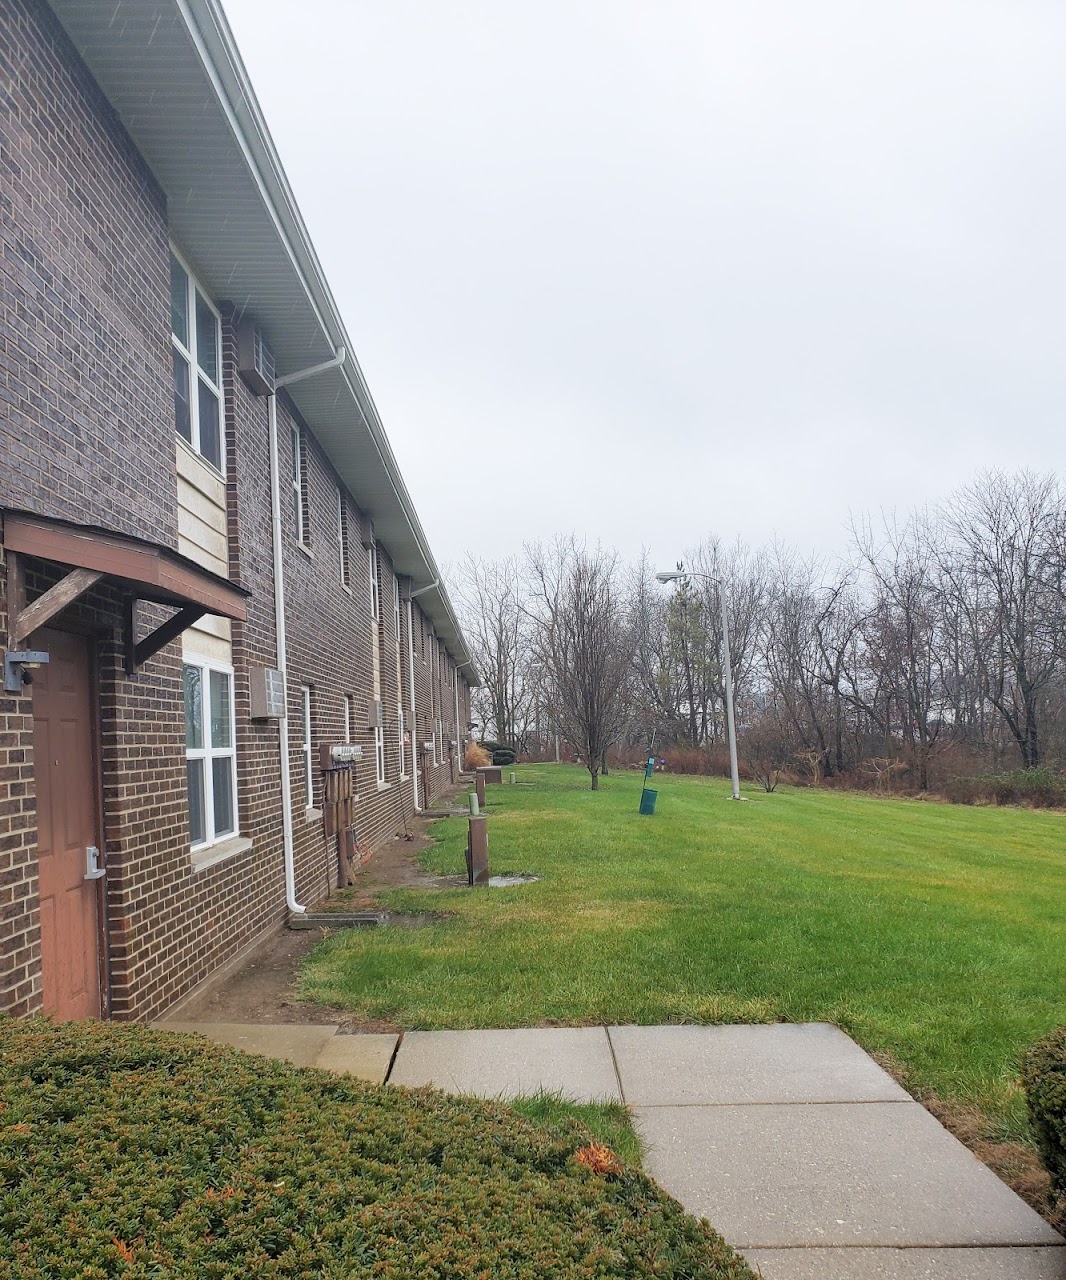 Photo of COUGILL APTS. Affordable housing located at 500 W POLK AVE CHARLESTON, IL 61920